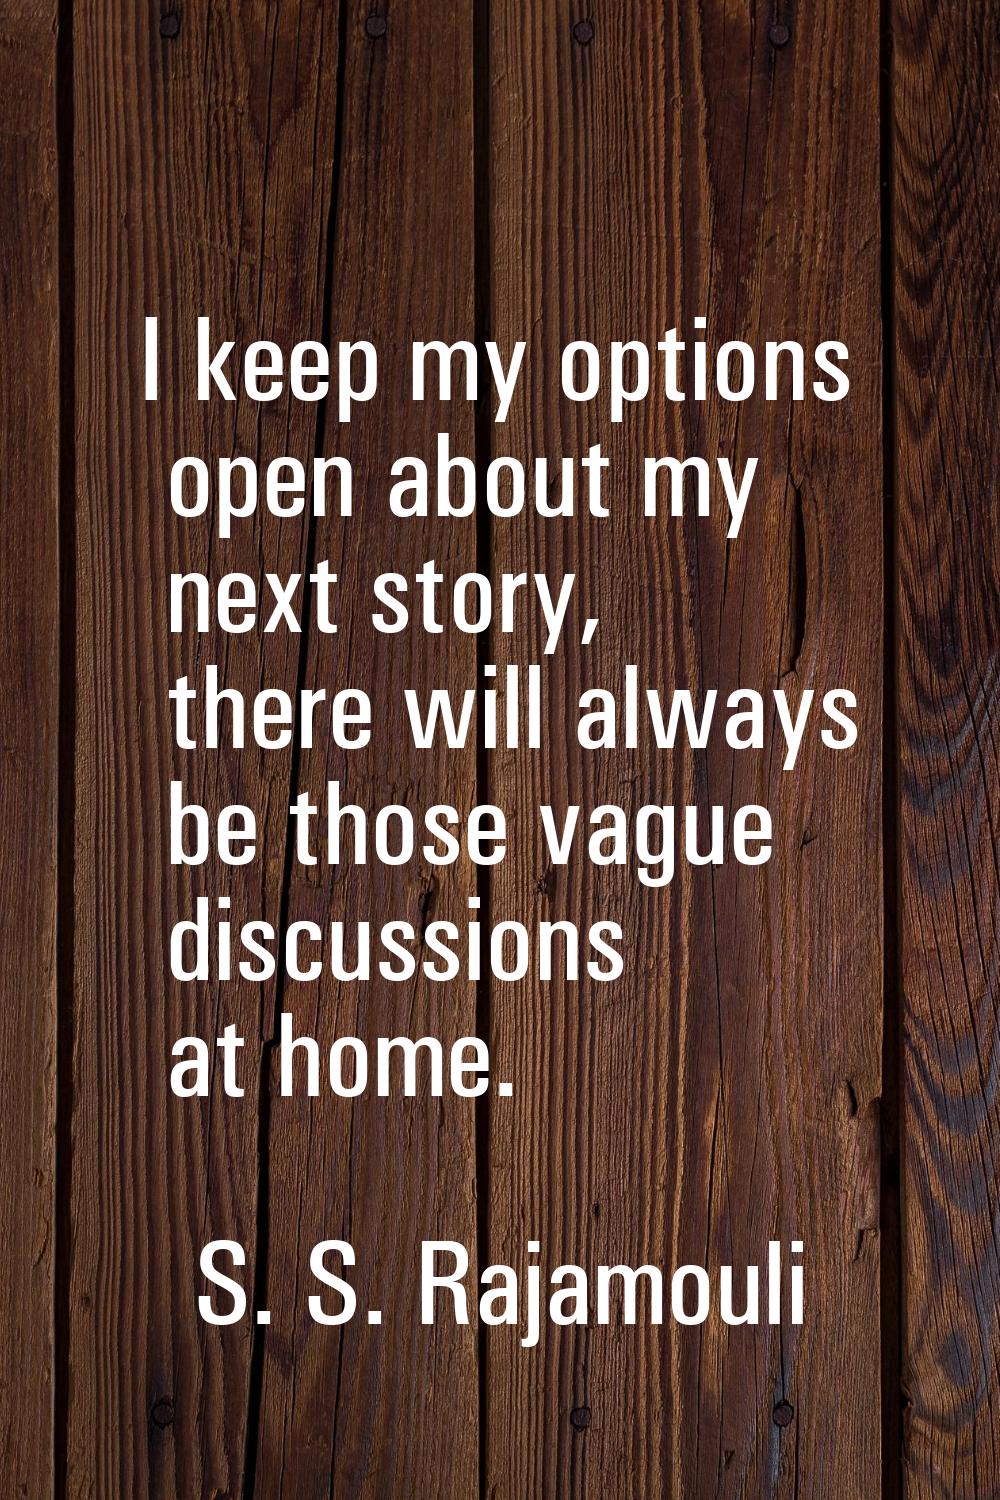 I keep my options open about my next story, there will always be those vague discussions at home.